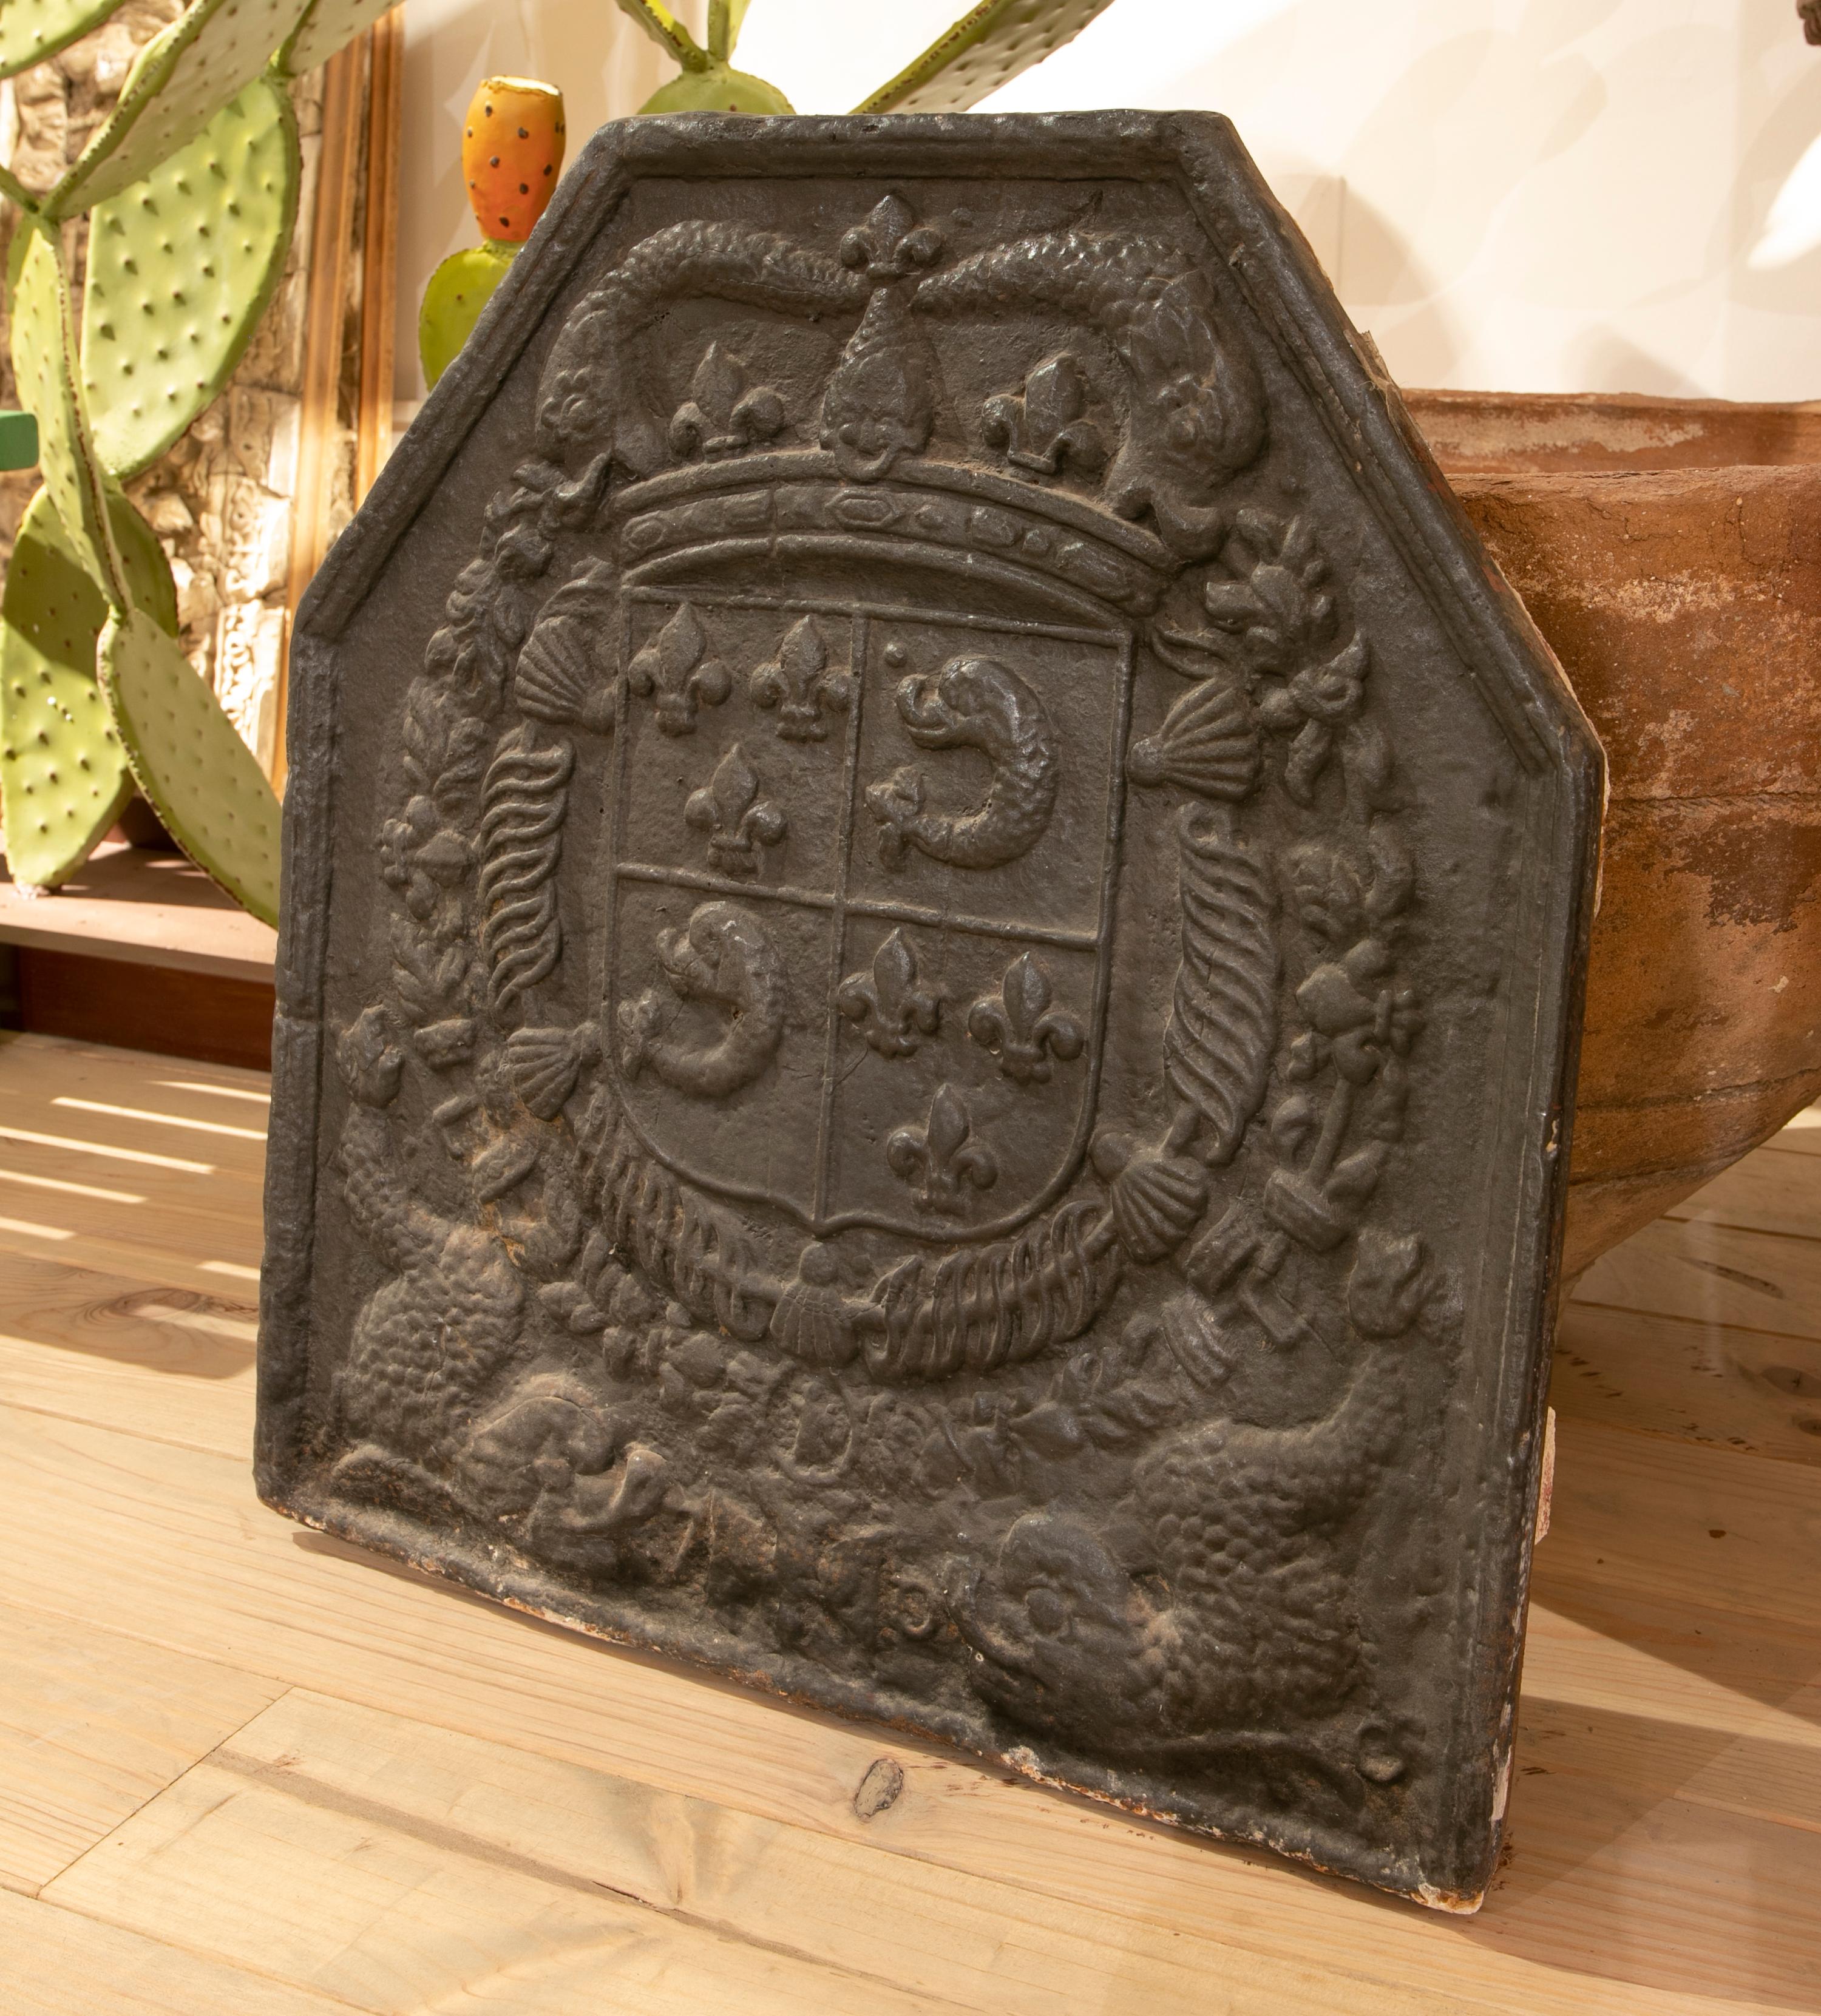 1850s Spanish cast iron fireback with relief heraldry coat of arms with crown and fleur-de-lys emblems.
 